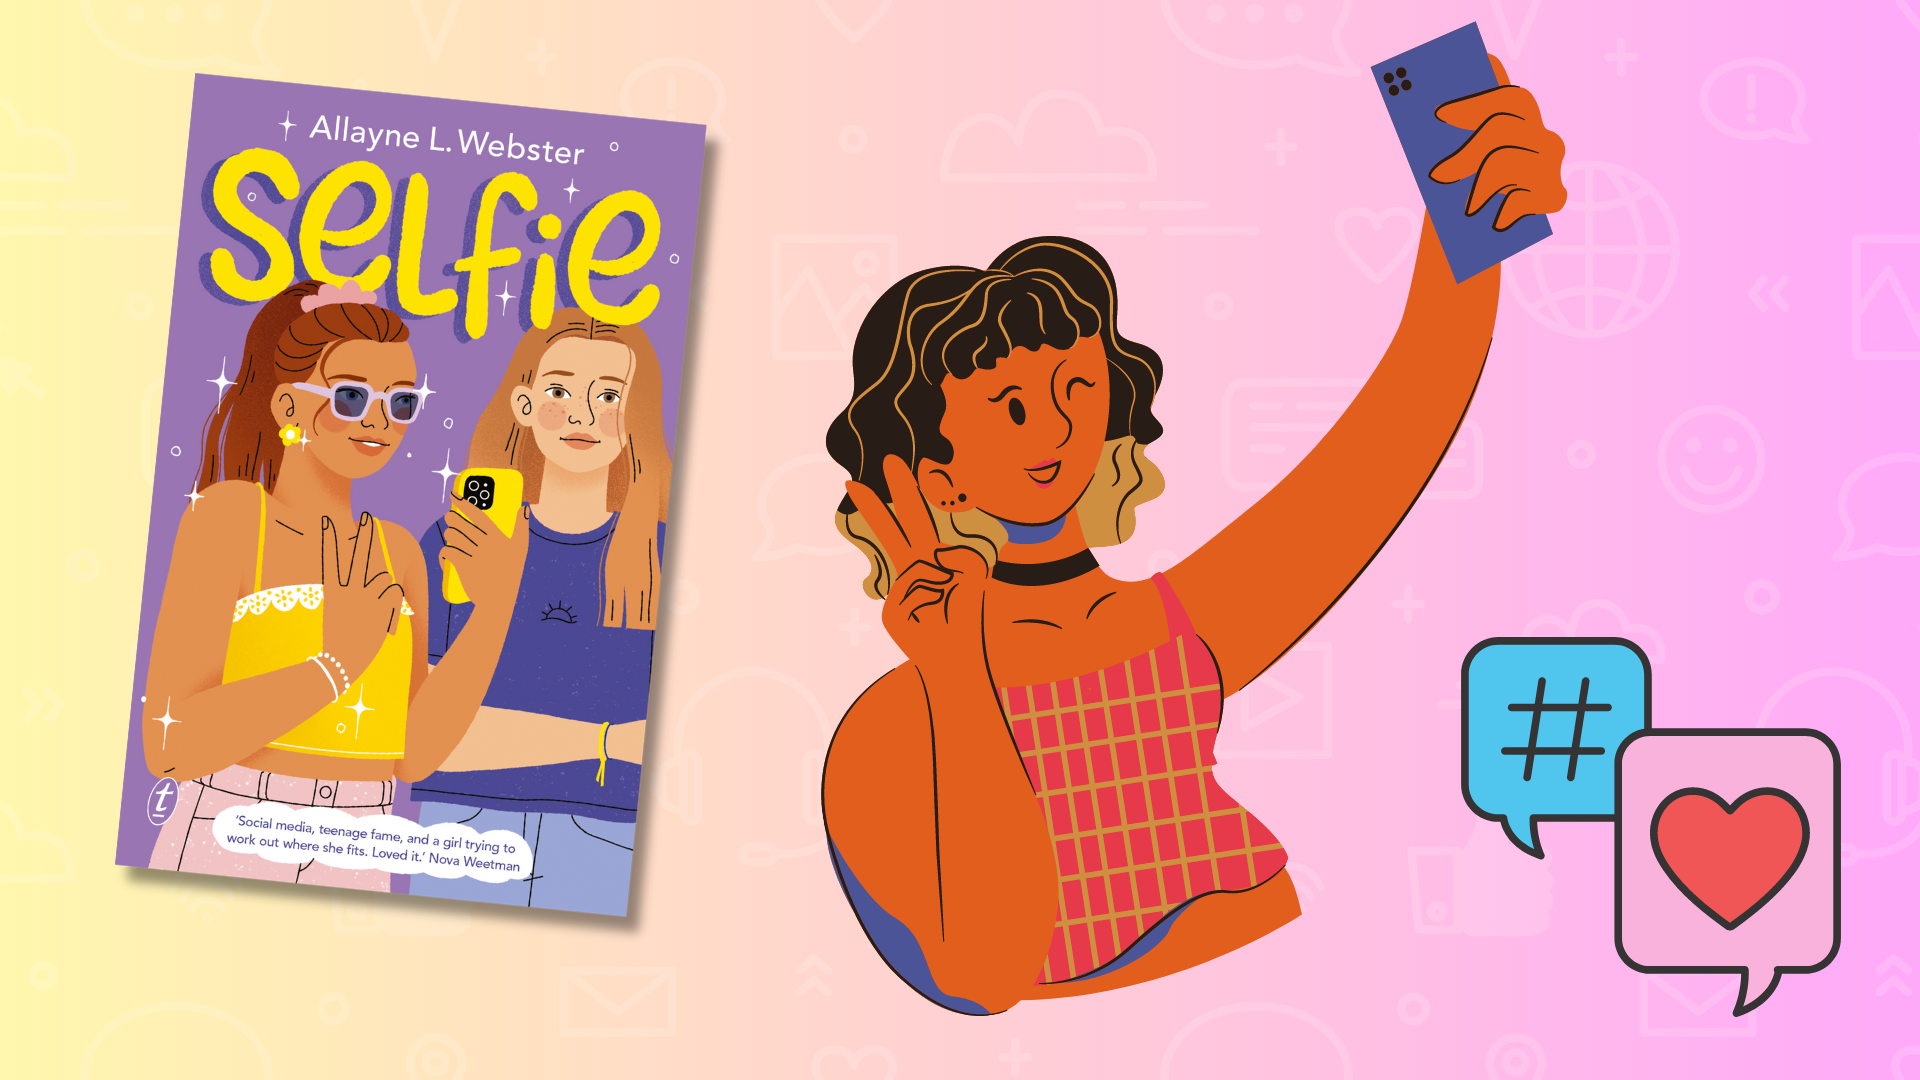 An image of the cover of 'Selfie' by Allayne Webster, an illustration of a young woman taking a selfie, and a hashtag and love heart in speech bubbles.